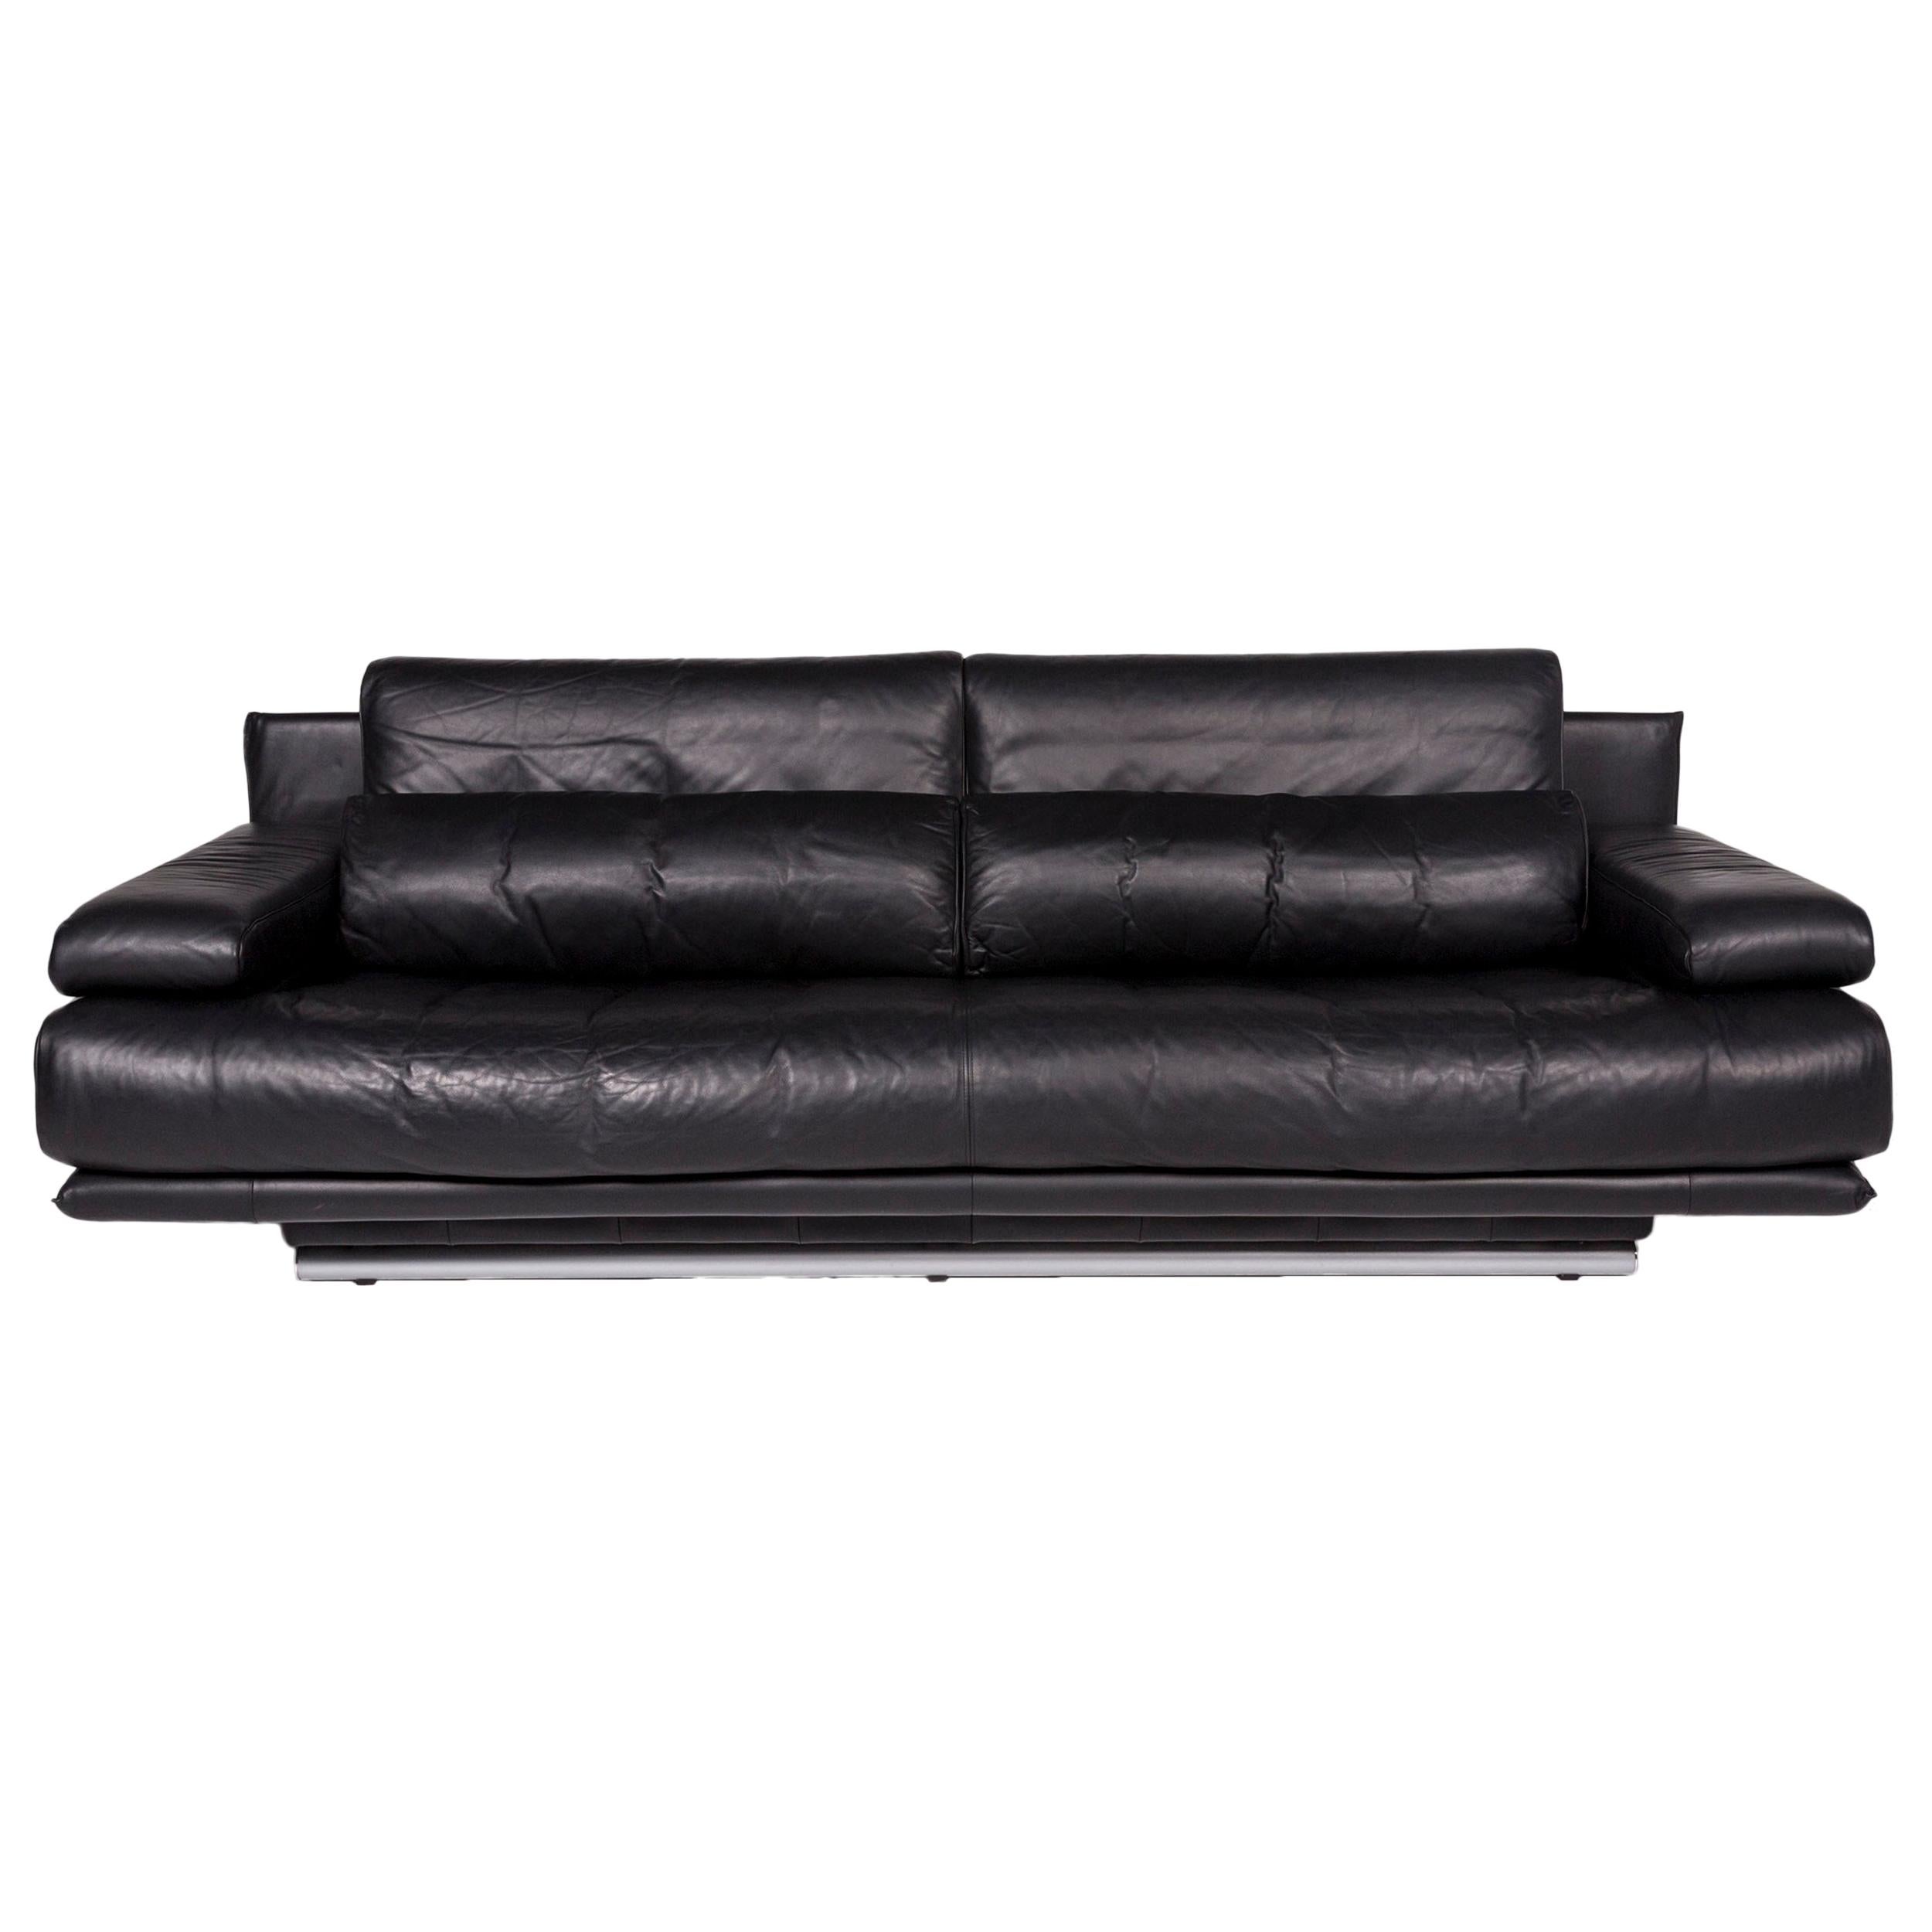 Rolf Benz 6500 Leather Sofa Black Three-Seat Couch